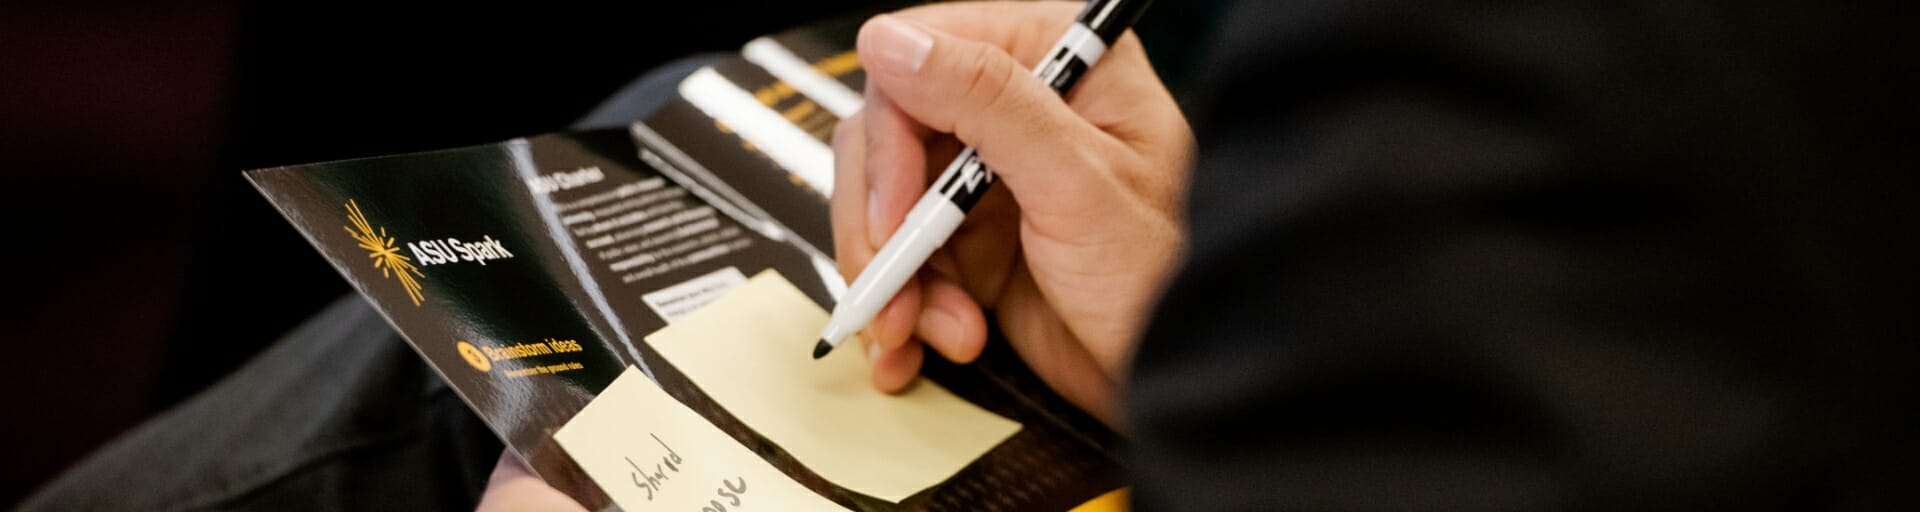 
		An entrepreneur takes notes on a program using Post-it notes and a black felt-tip marking pen.		